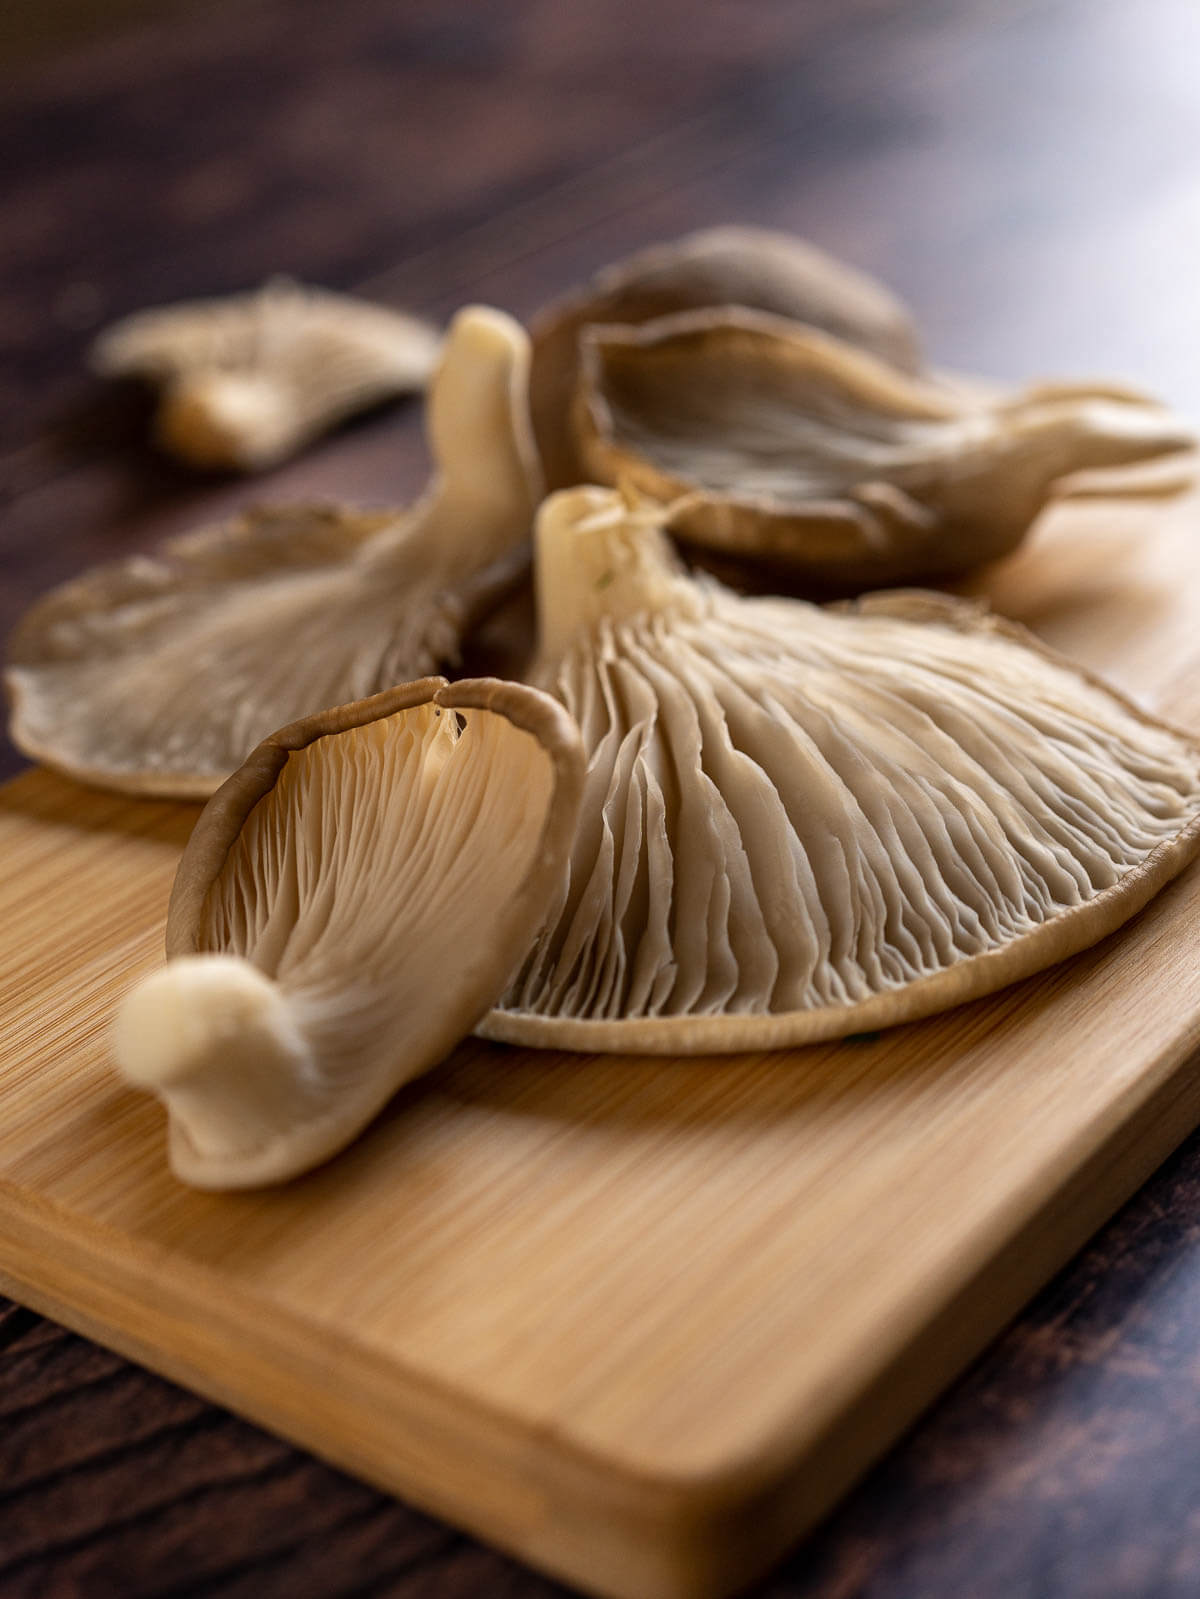 blue oyster mushrooms on a wooden table.